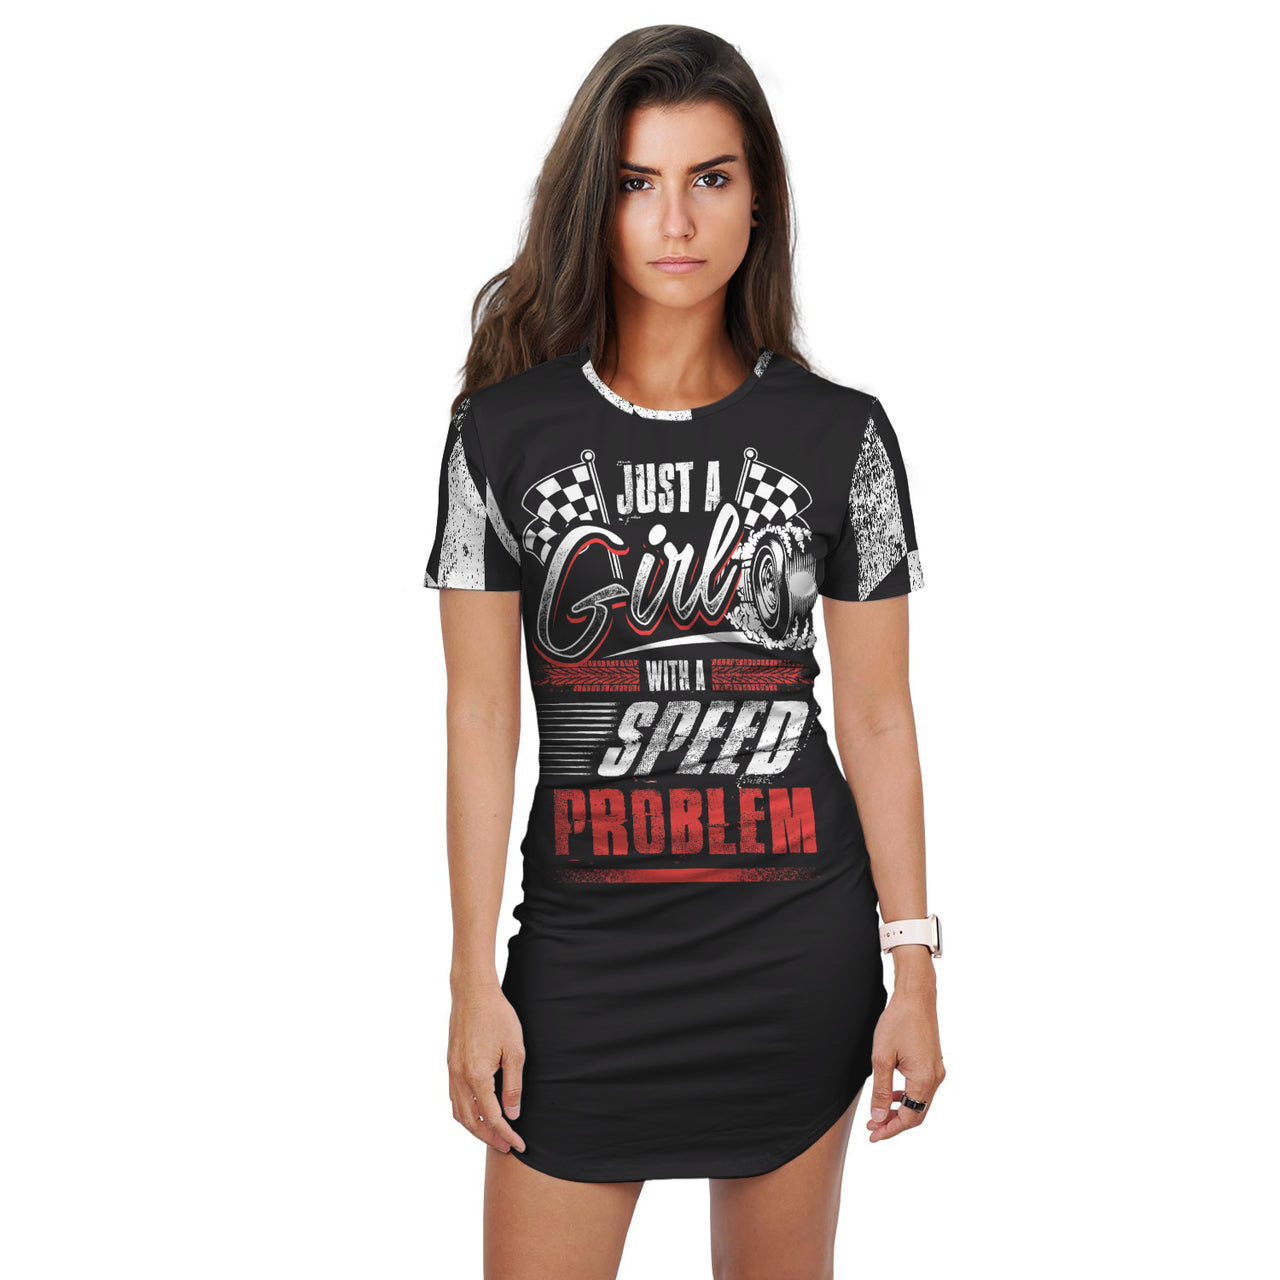 Just A Girl With Speed Problem T-Shirt Design